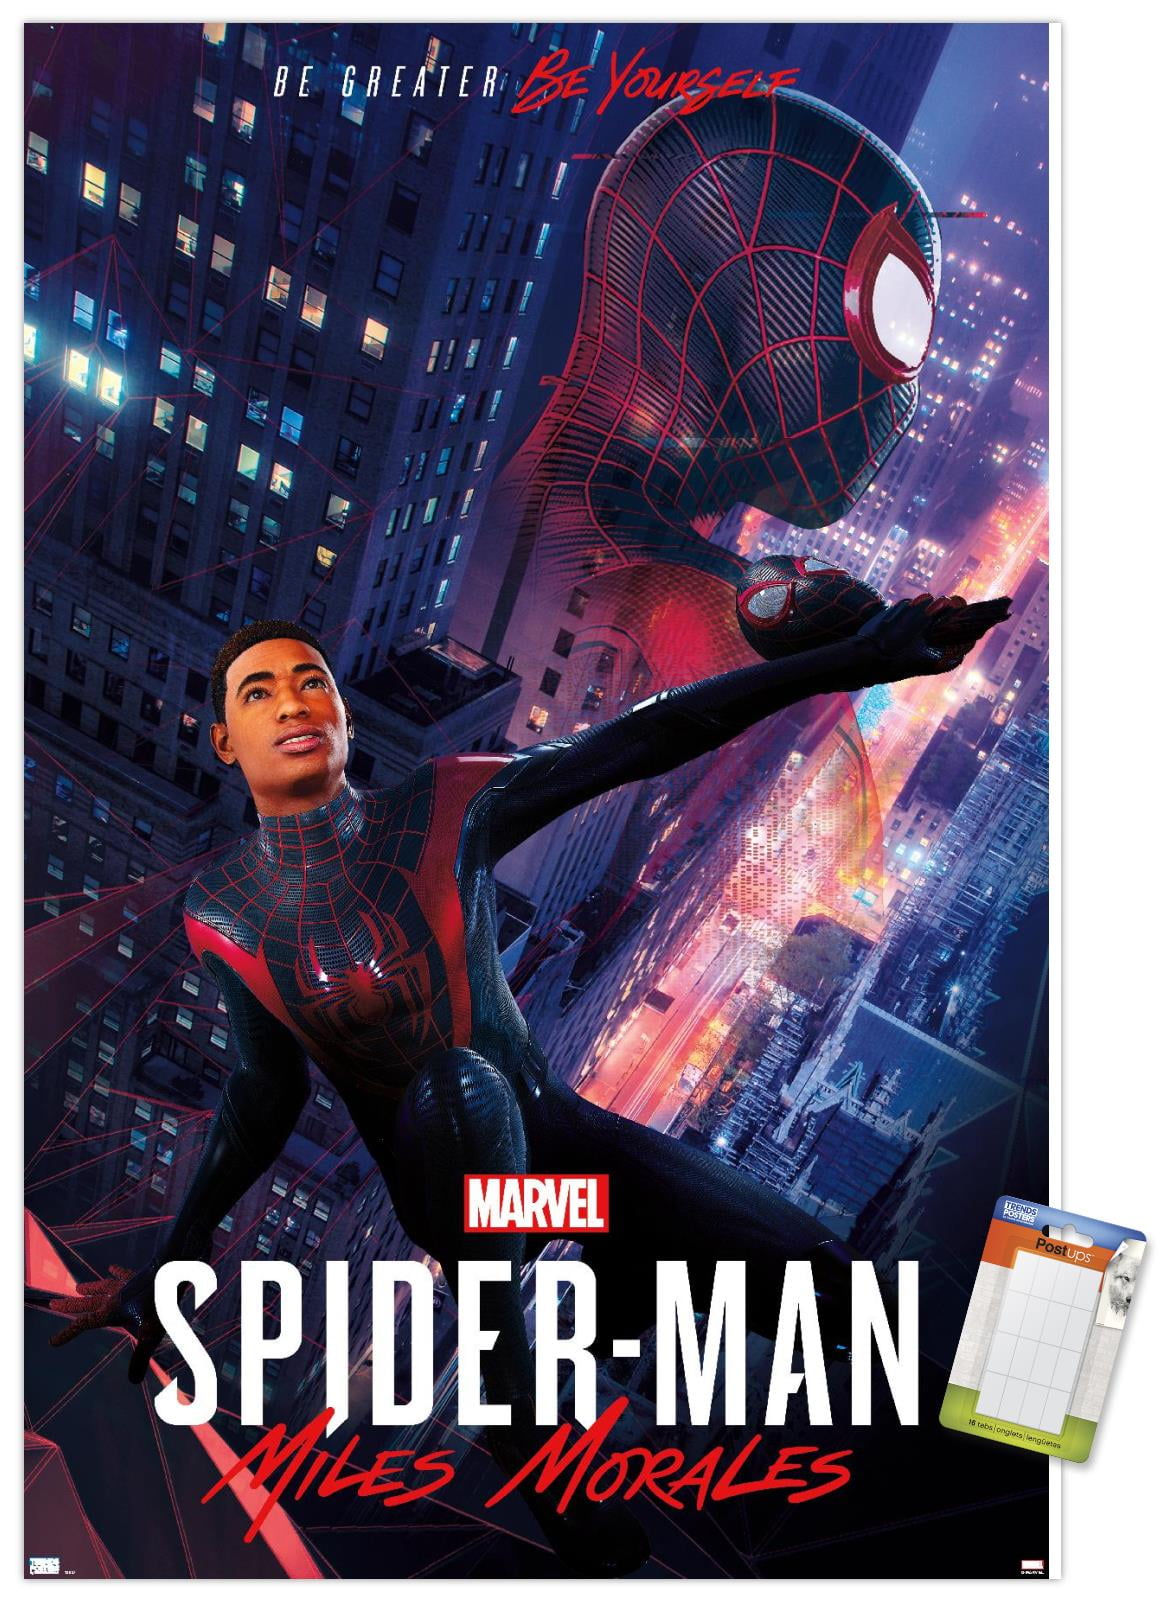 Marvel's Spider-Man: Miles Morales - Pose Wall Poster, 22.375 x 34 